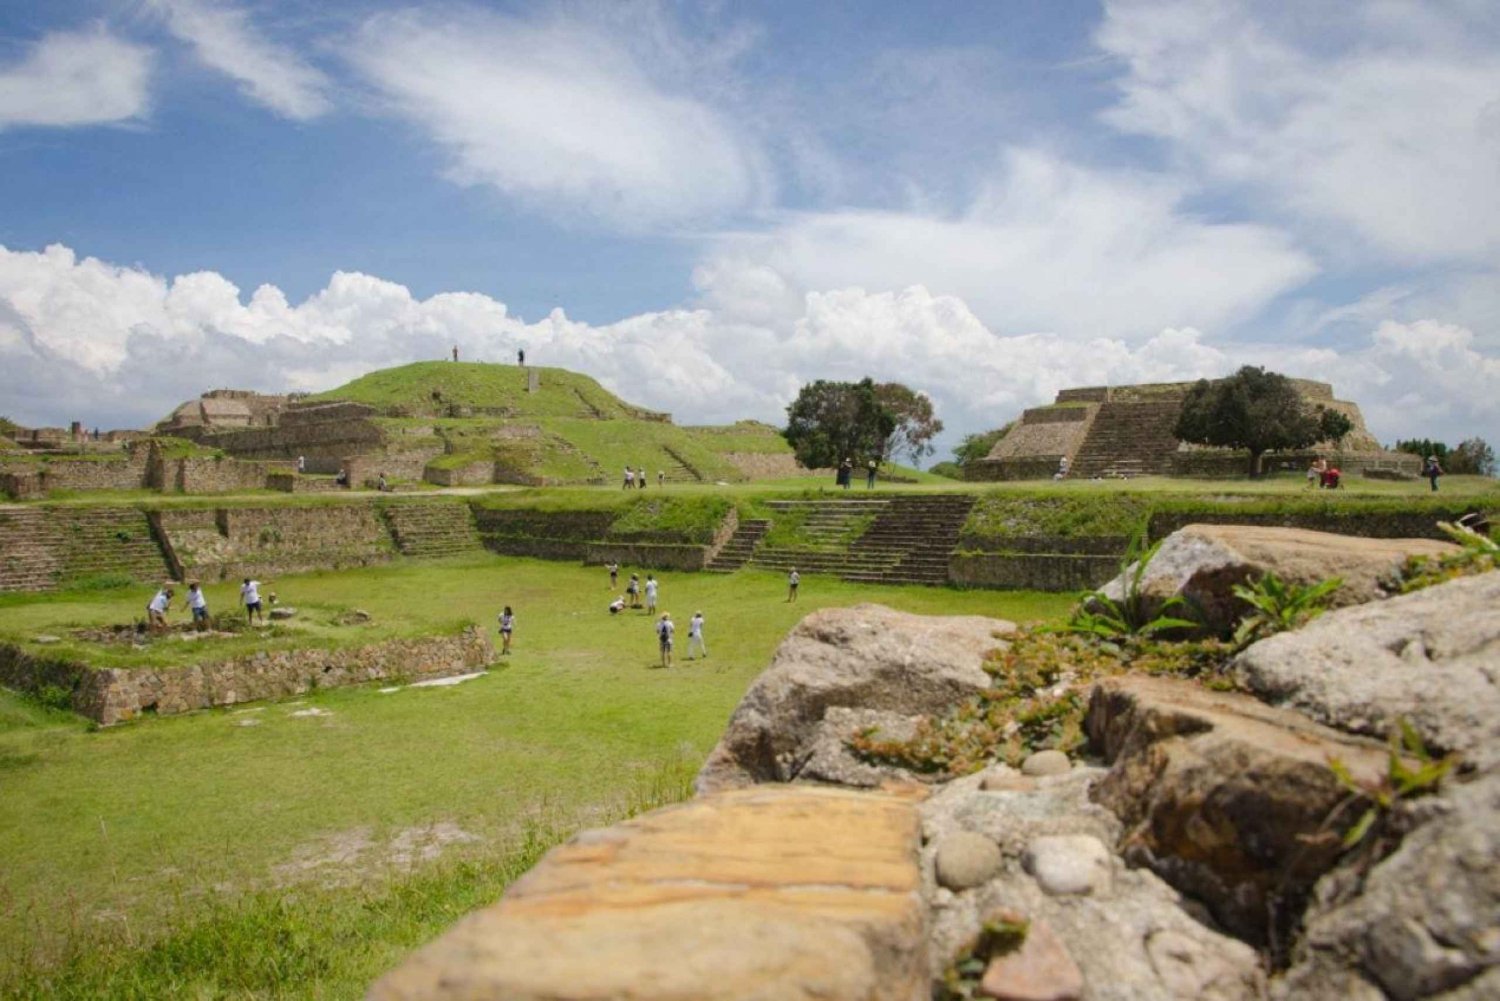 Oaxaca: Monte Alban Guided Archaeological Tour